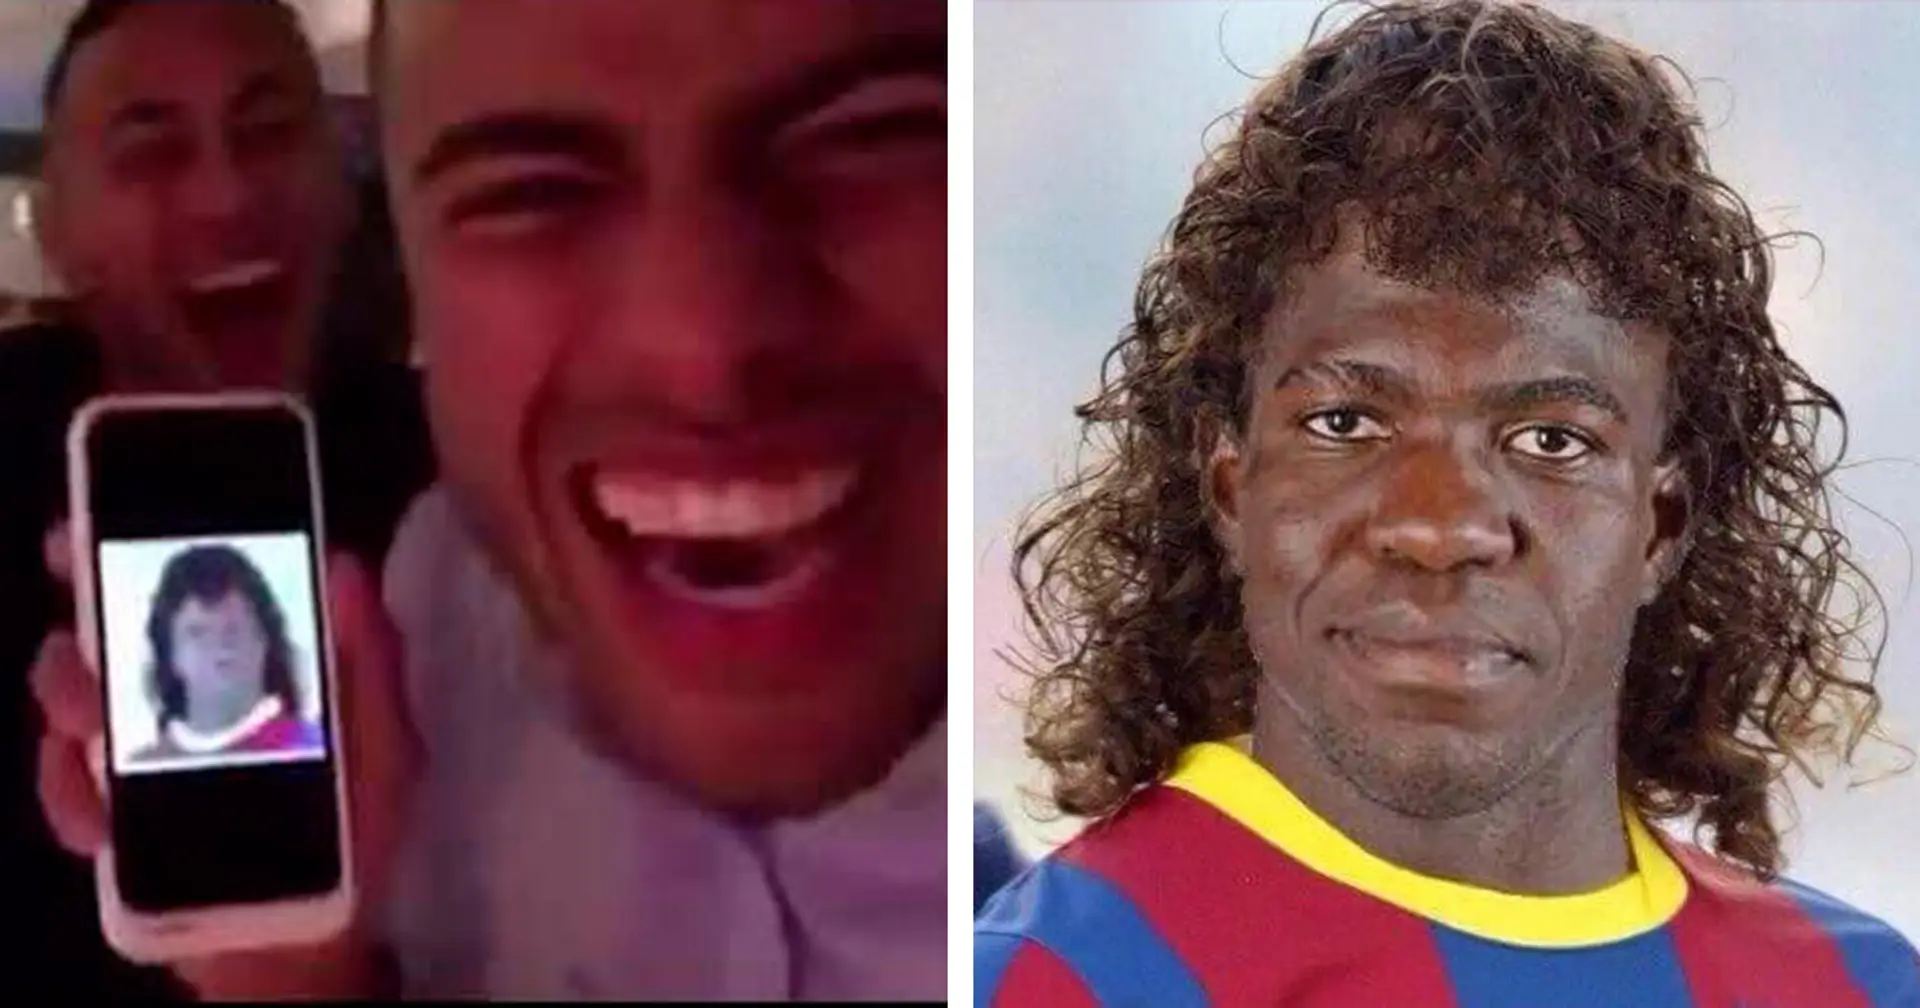 'Samyol Putiti': Throwback to when Neymar and Rafinha merged pics of Umtiti and Puyol and roared with laughter (video)